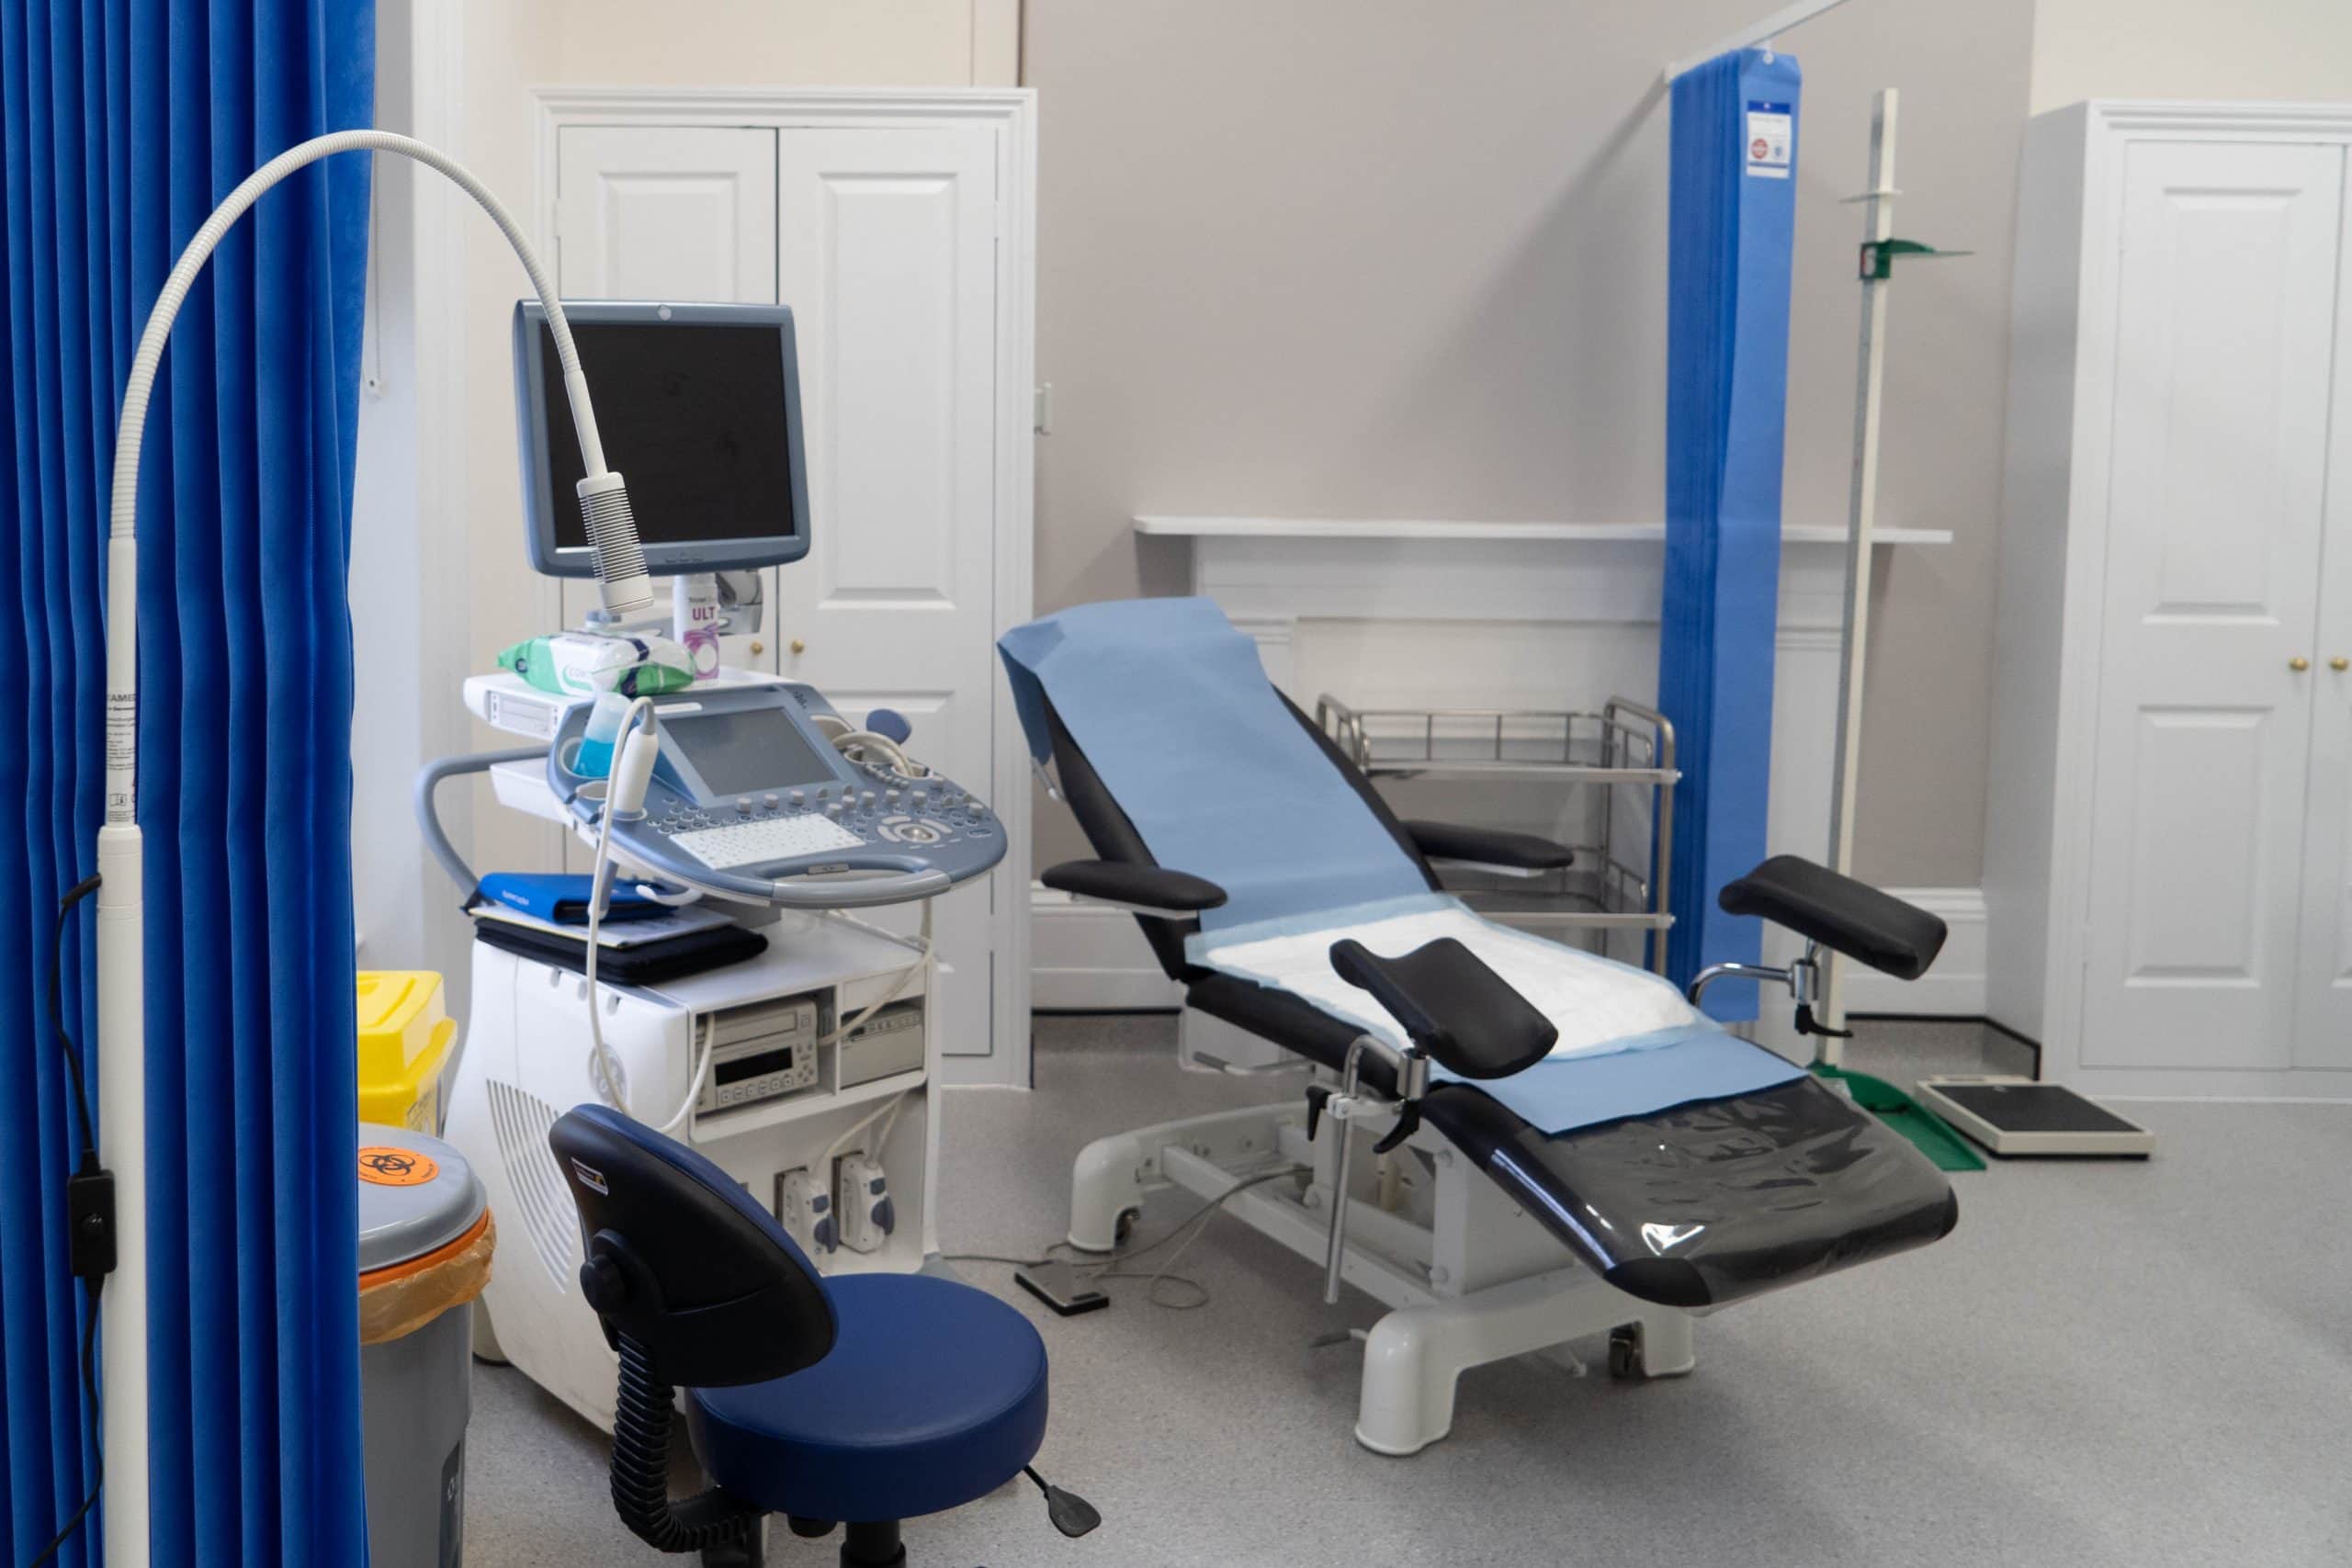 CRGH fertility treatment room with an examination table and fertility treatment technology, based in Cantebury.